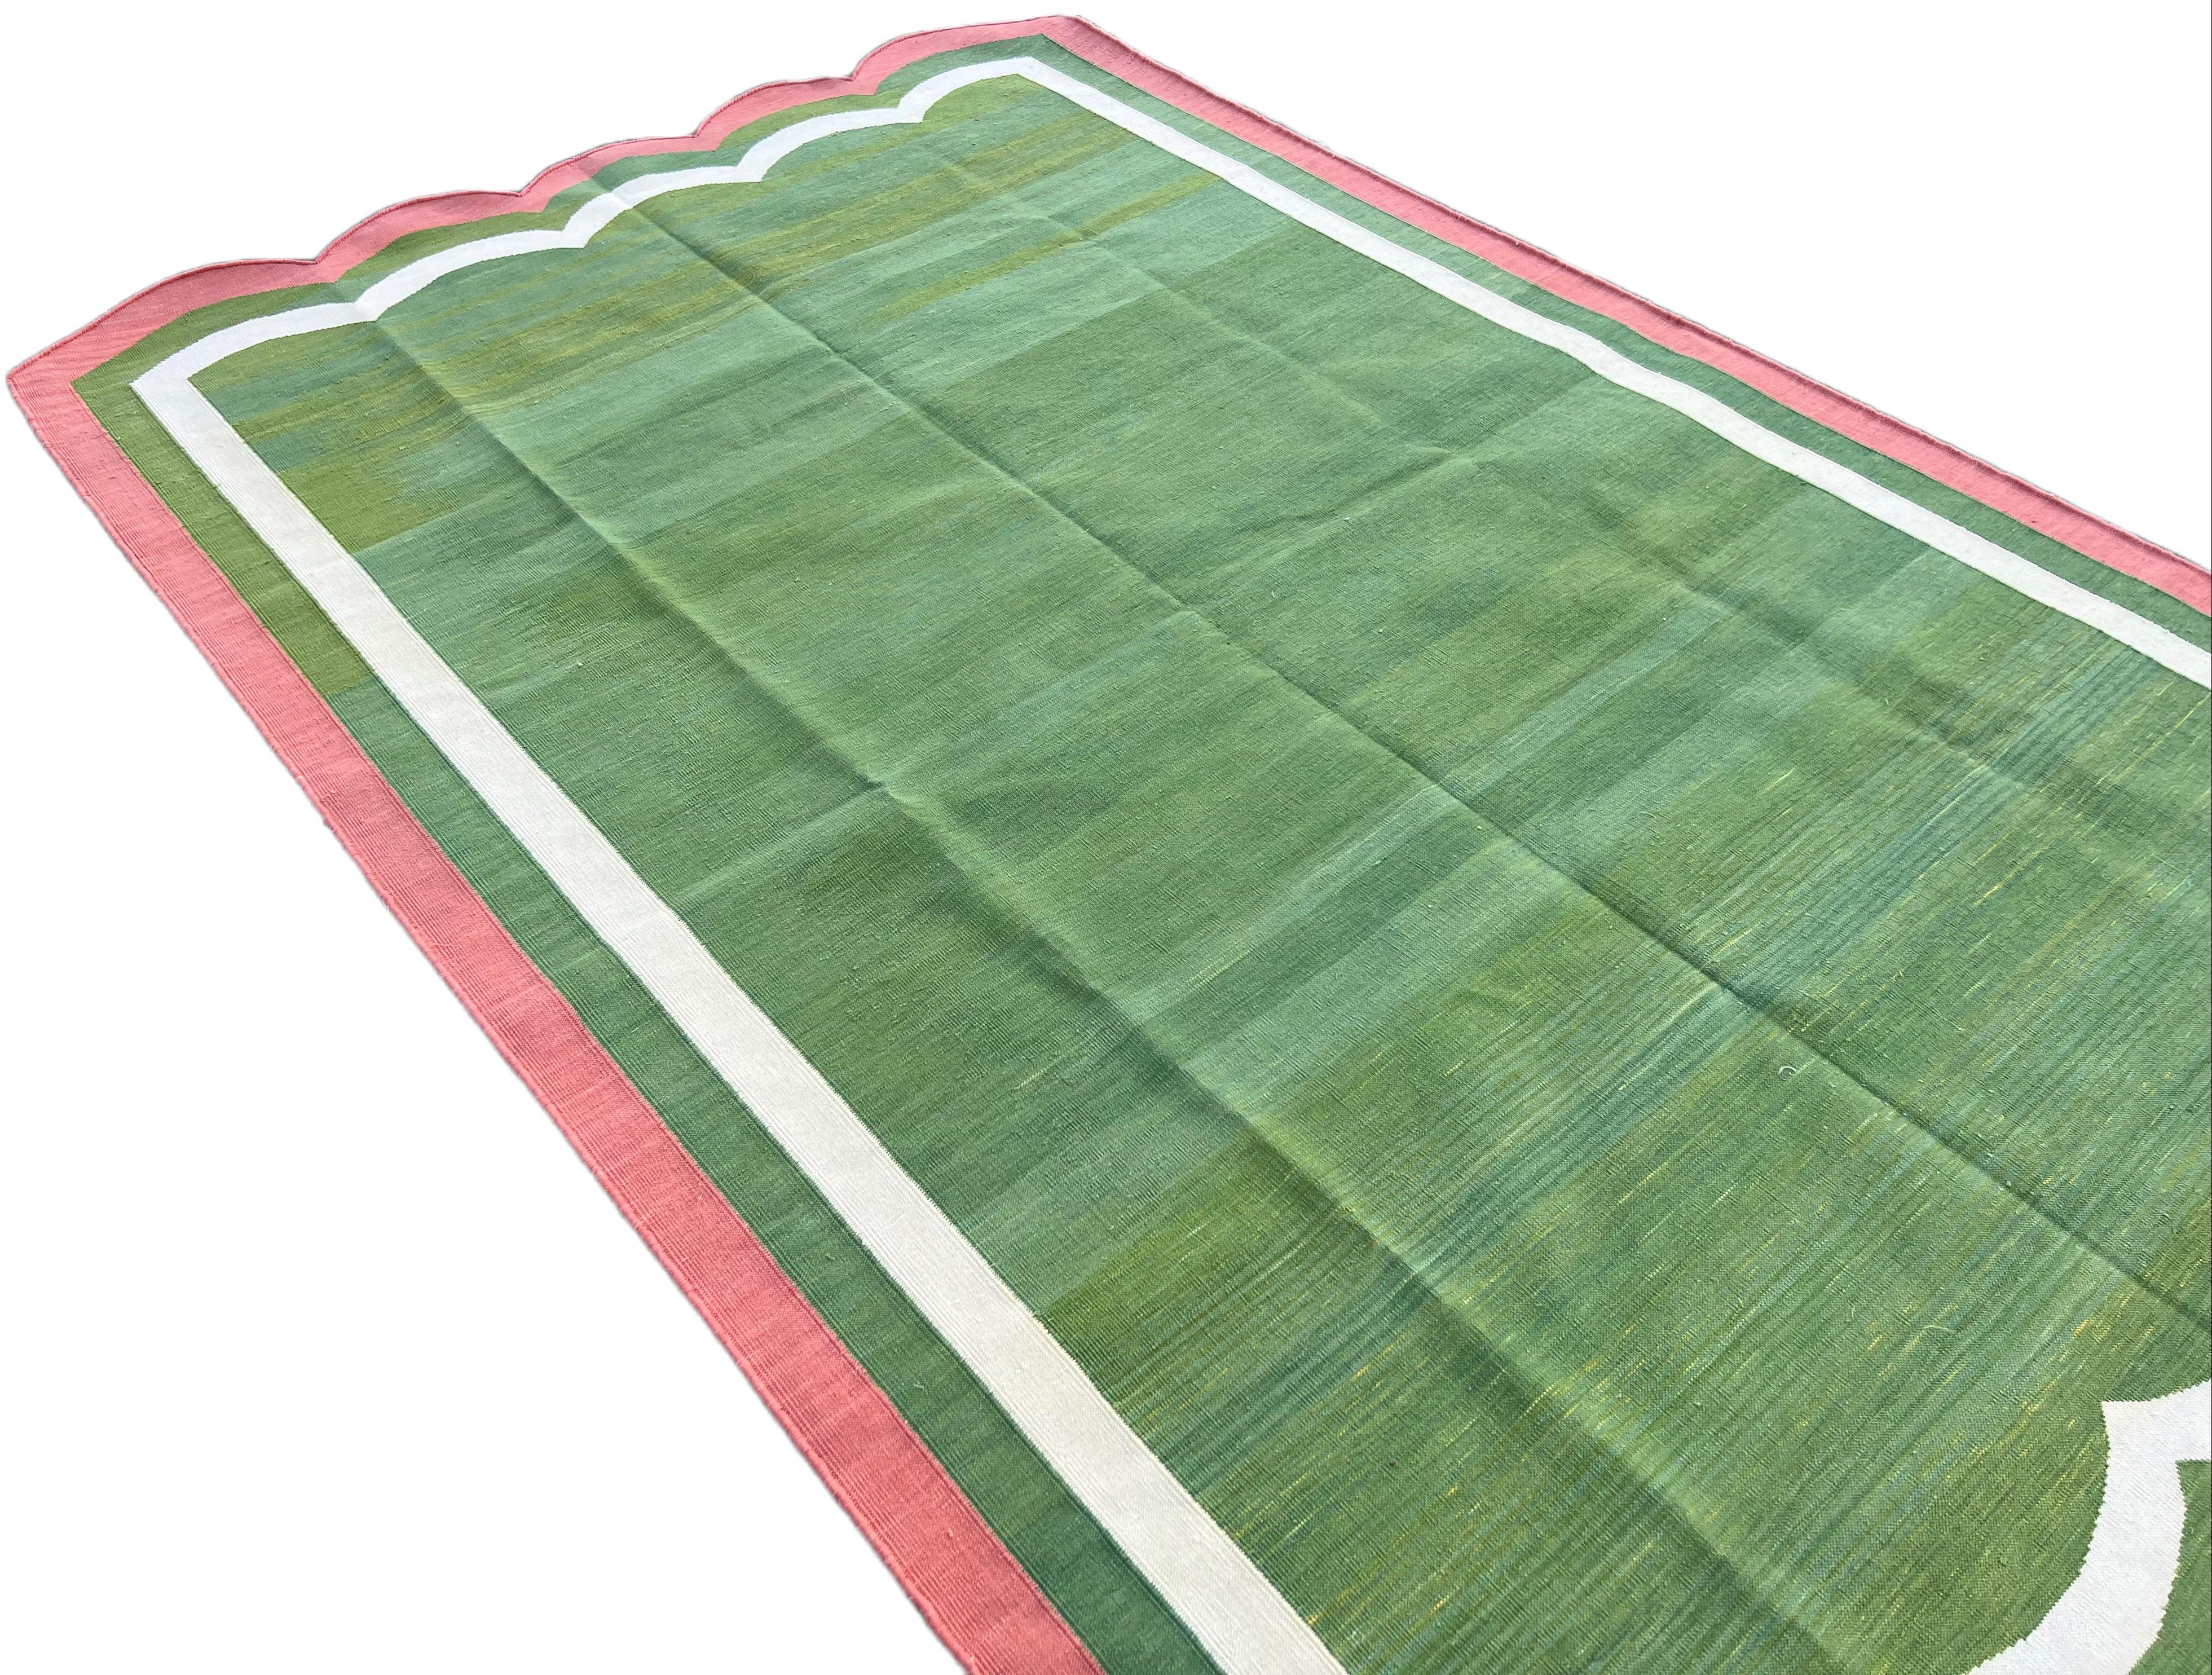 Hand-Woven Handmade Cotton Area Flat Weave Rug, 5x8 Green And Pink Scalloped Kilim Dhurrie For Sale